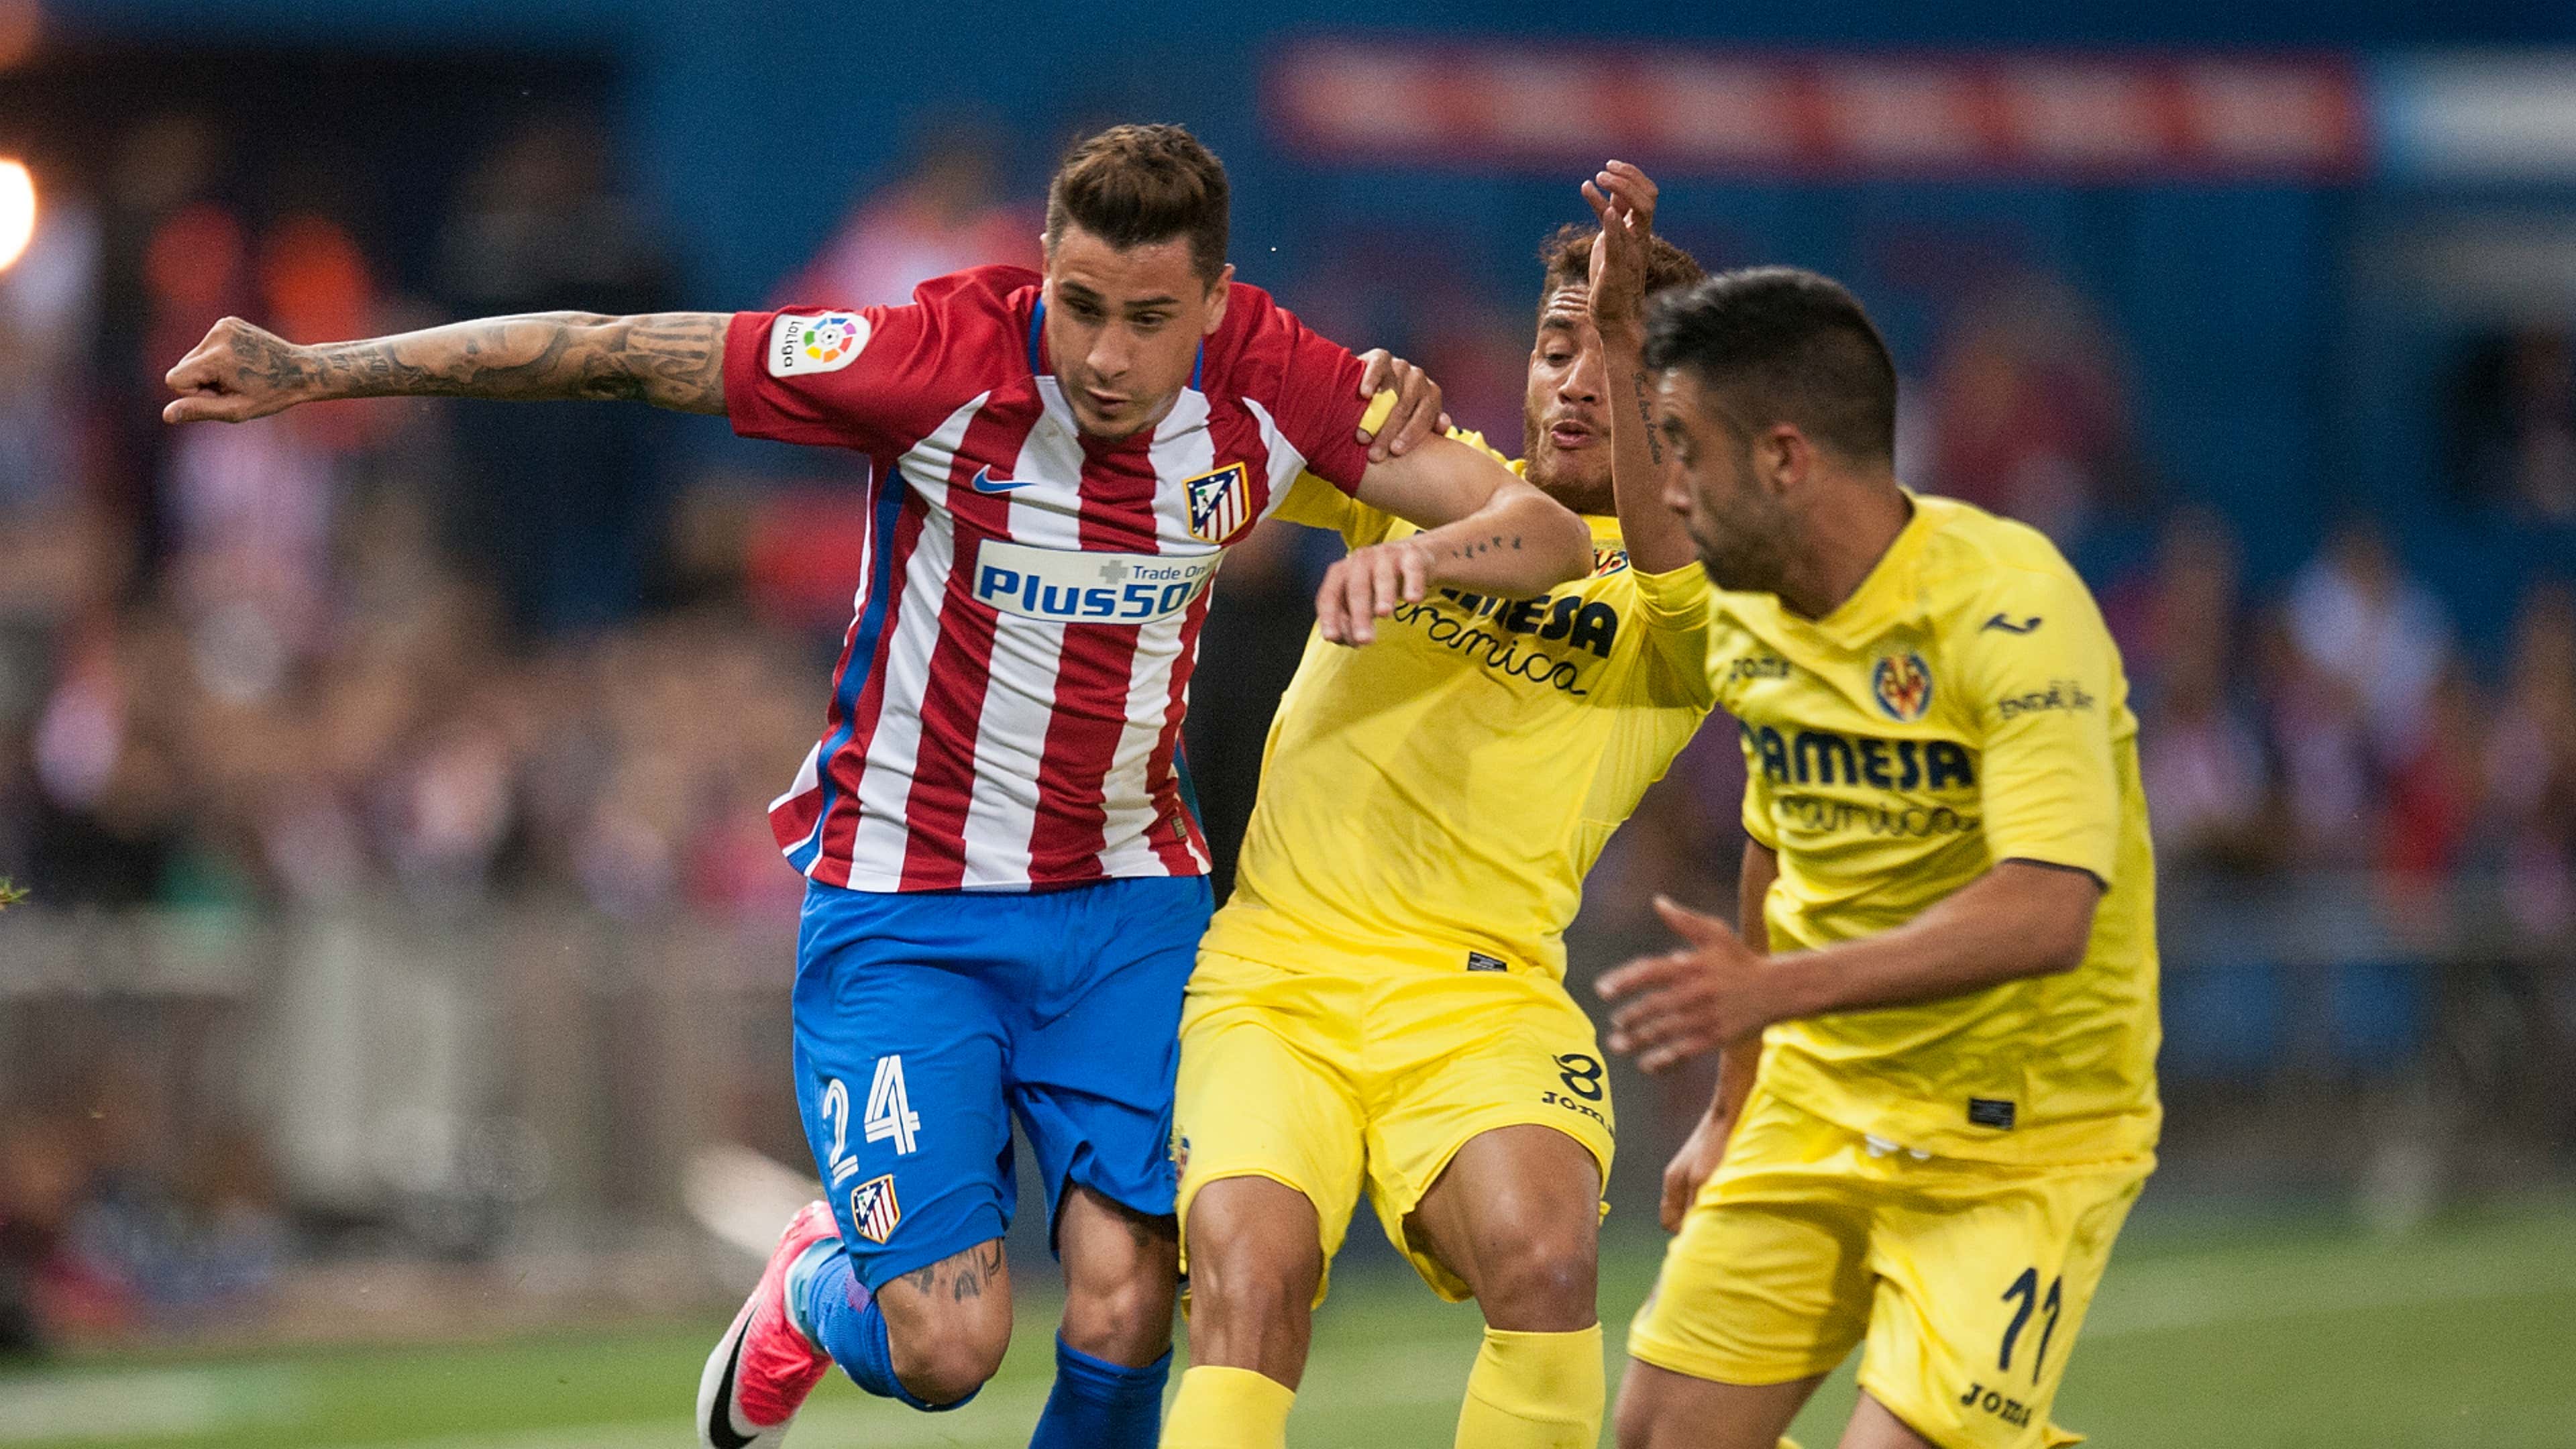 Atlético de Madrid widely expected to beat Villarreal 